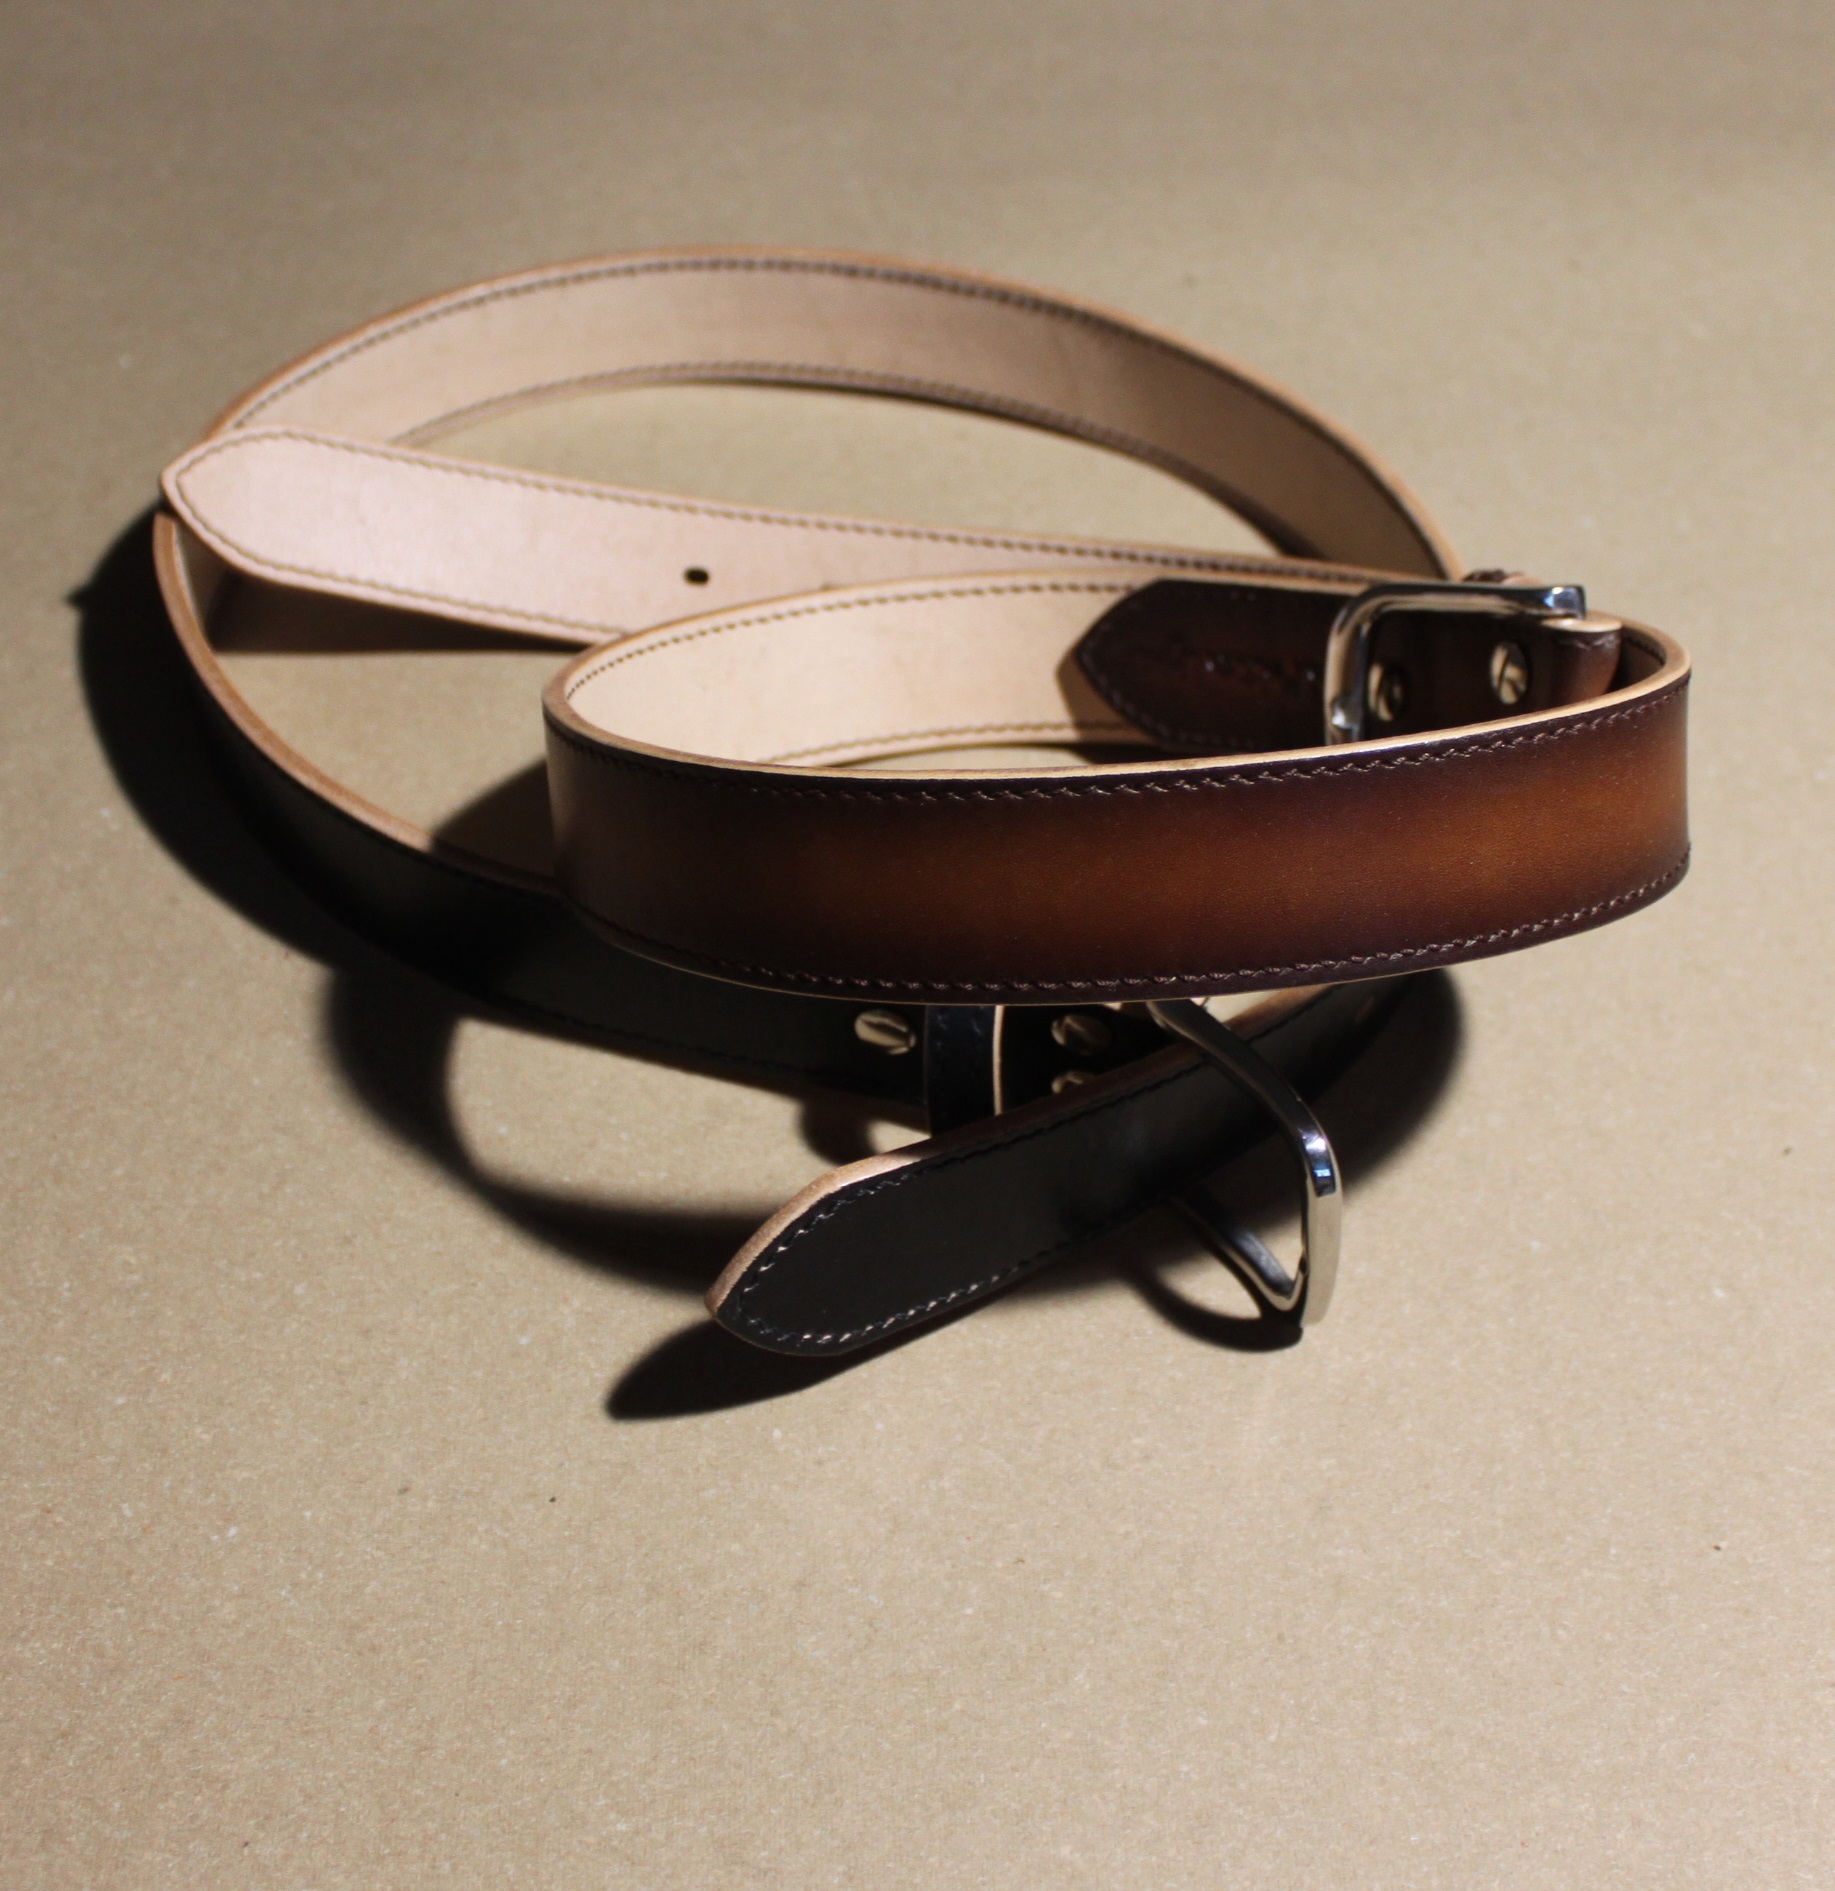 Handmade belts for buckle 35mm - My, Leather products, Handmade, Belt, Natural leather, Longpost